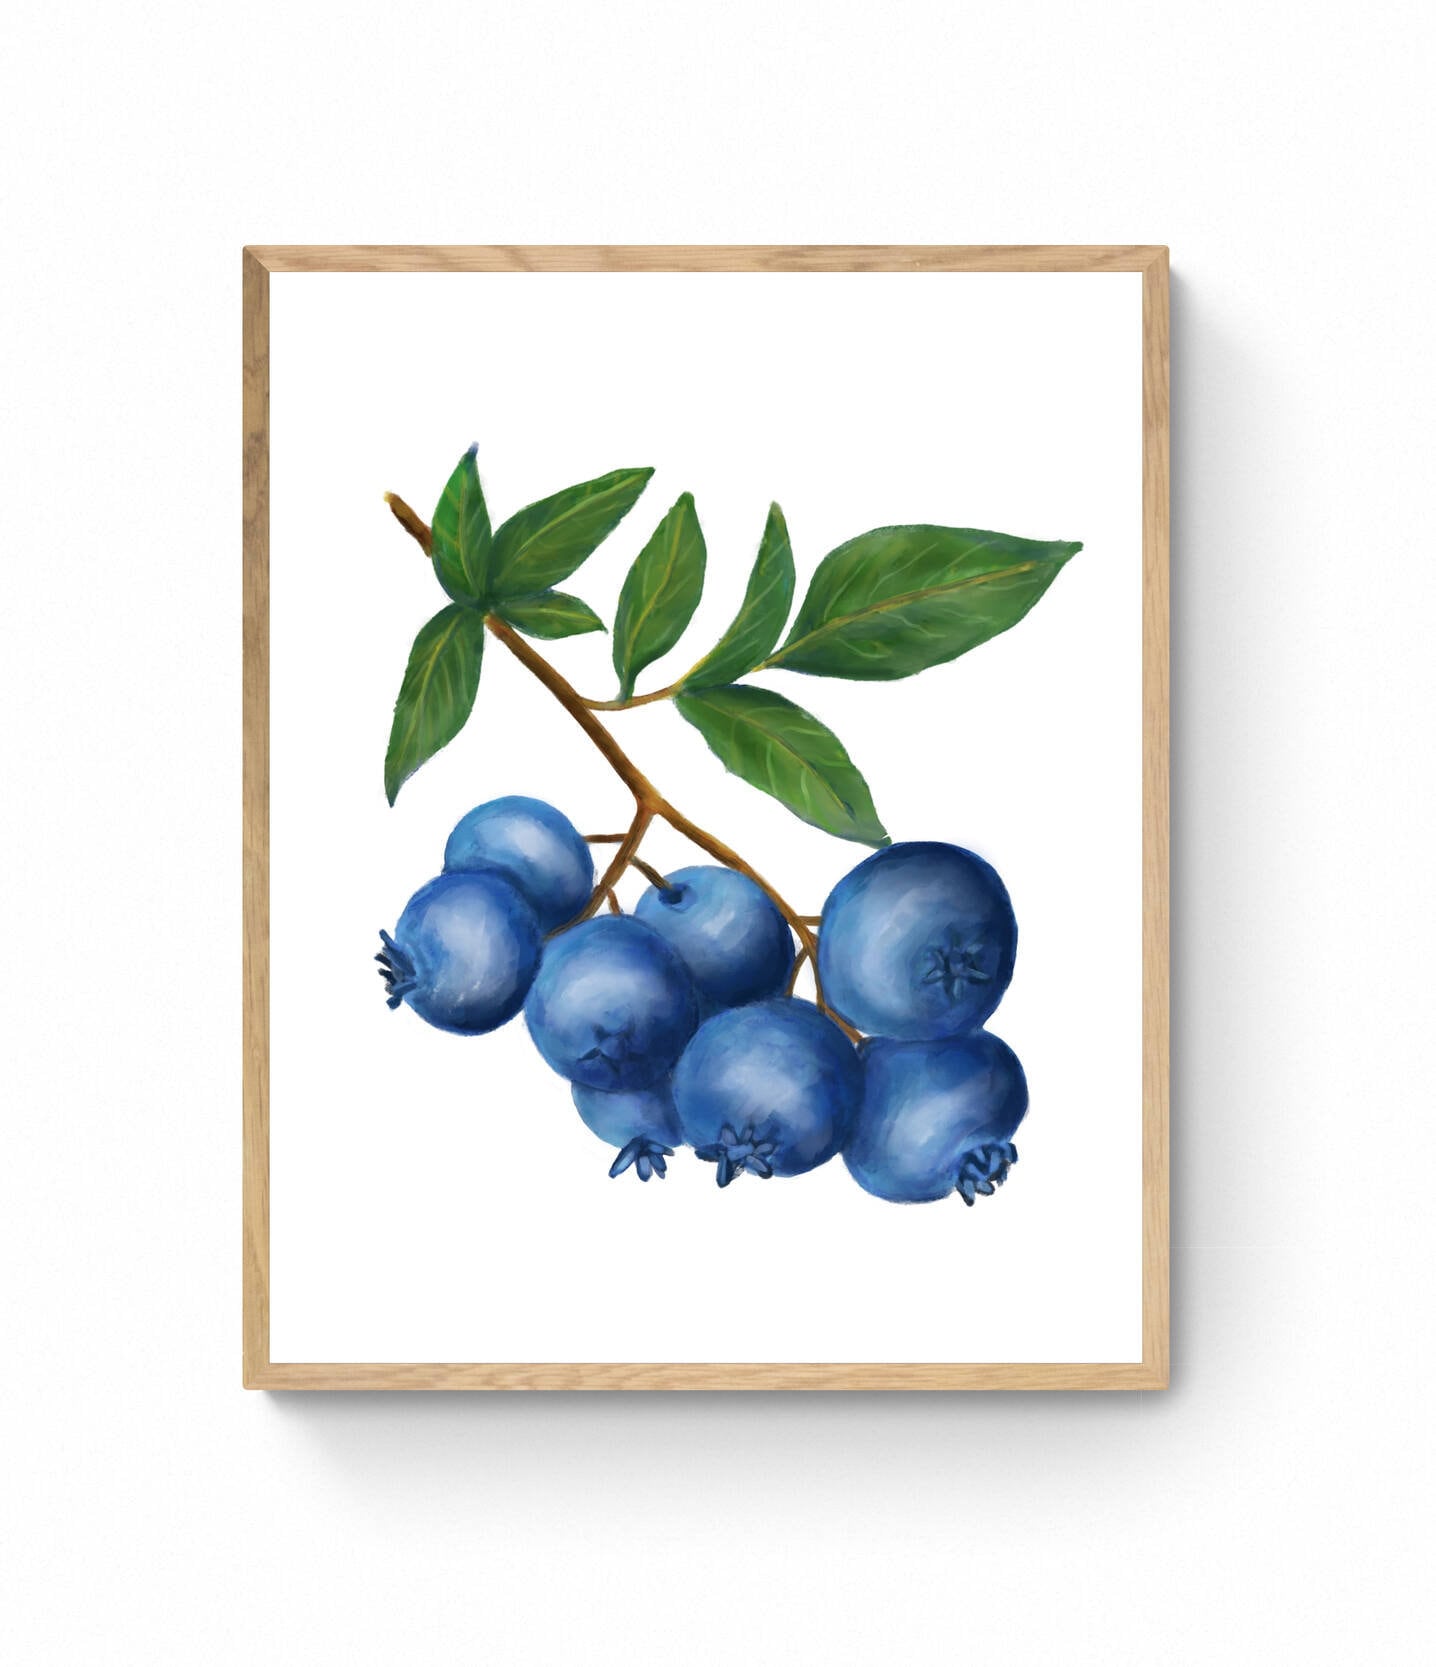 Set of 2 Cranberry Blueberry Art Print, Kitchen Wall Hanging, Dining Room Decor, Berry Painting, Fruit Illustration, Farmhouse Wall Decor